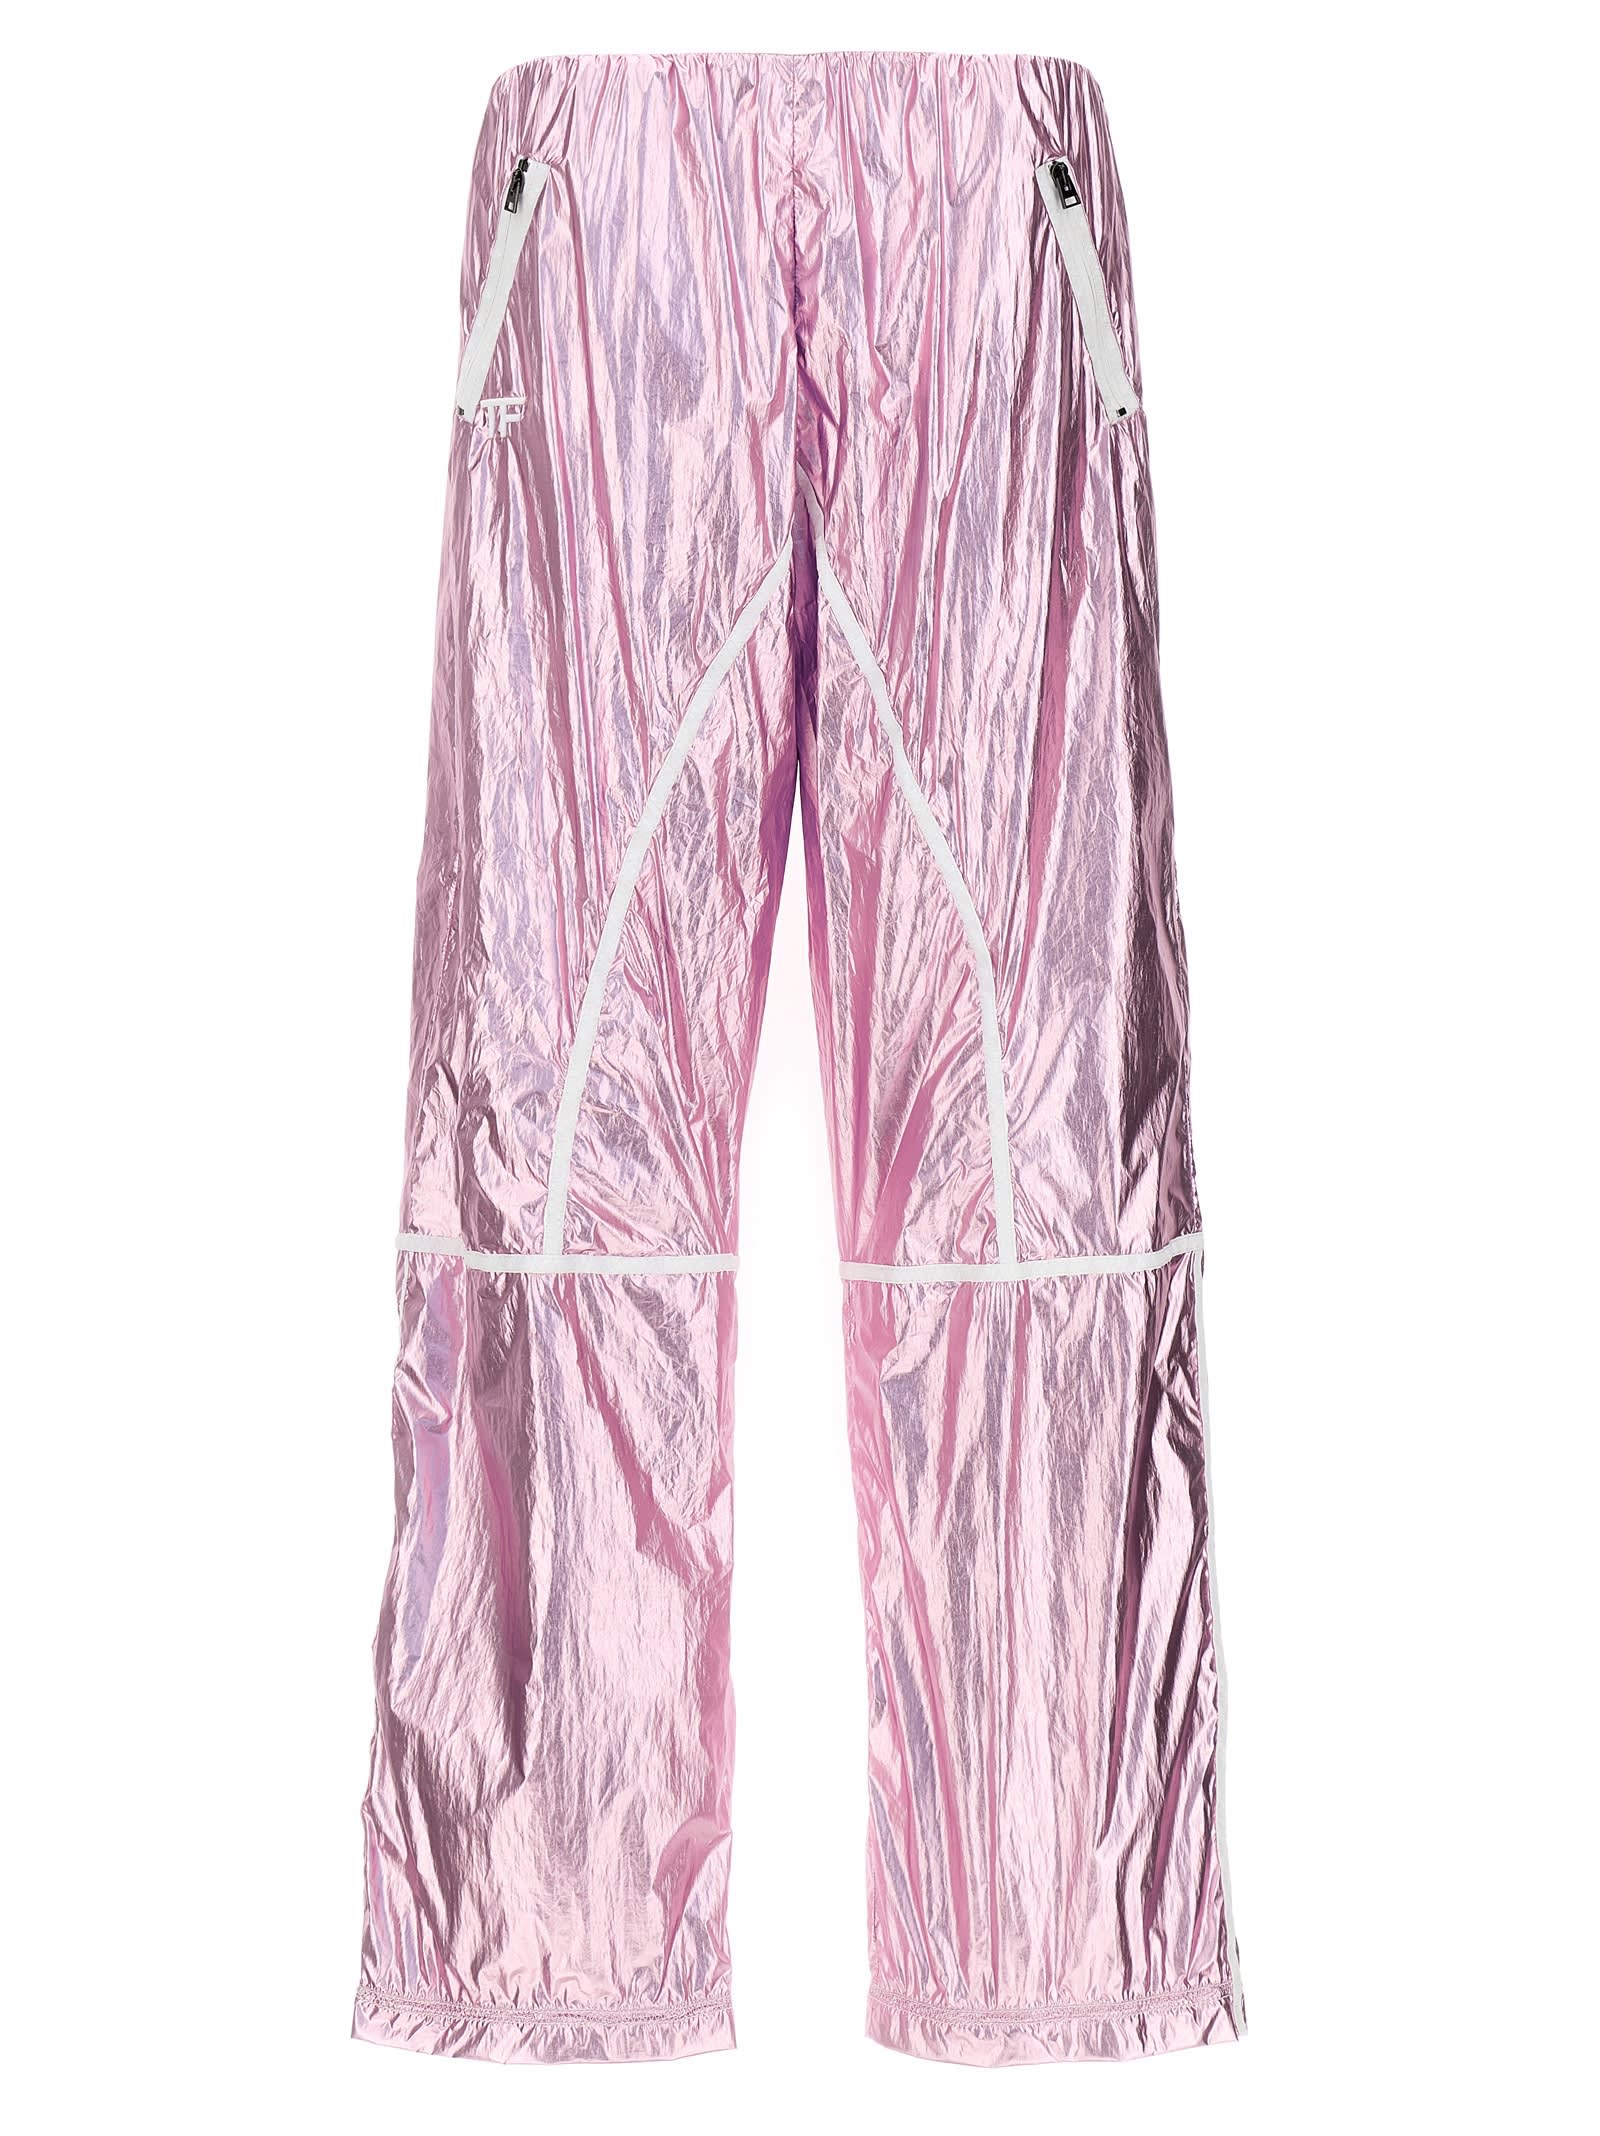 Tom Ford Laminated Track Pants